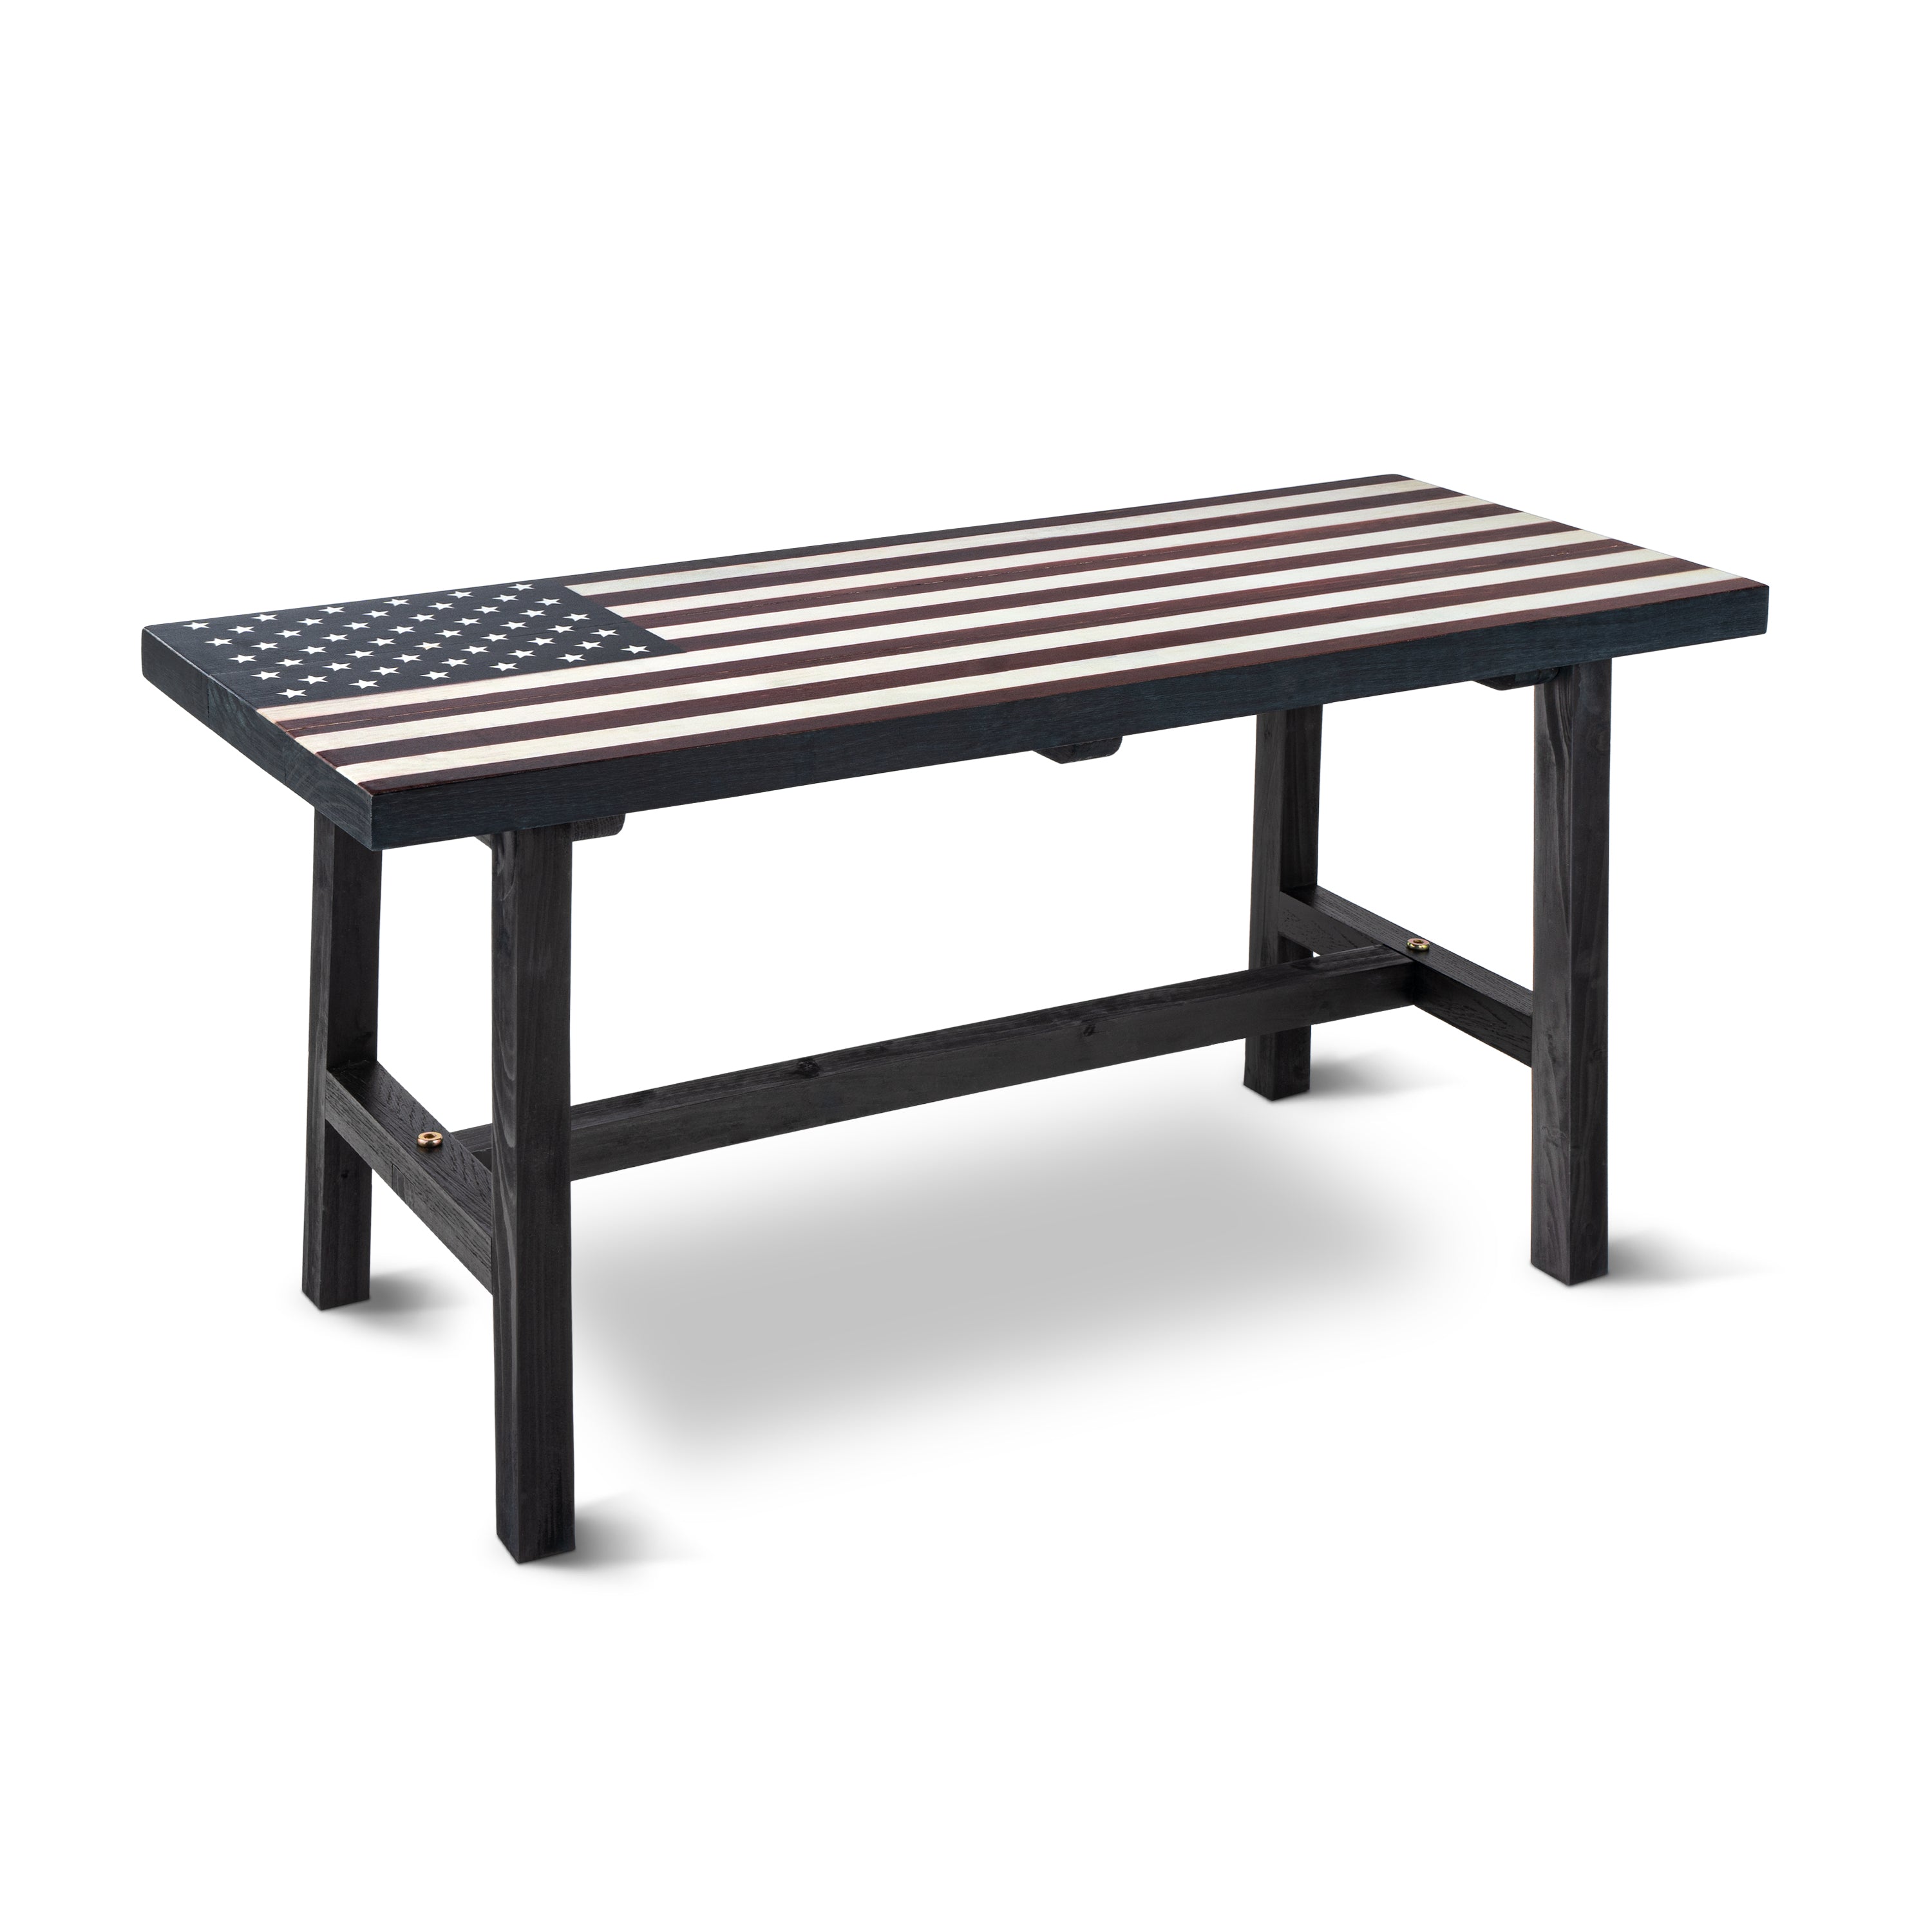 Wooden American Flag Patio Bench